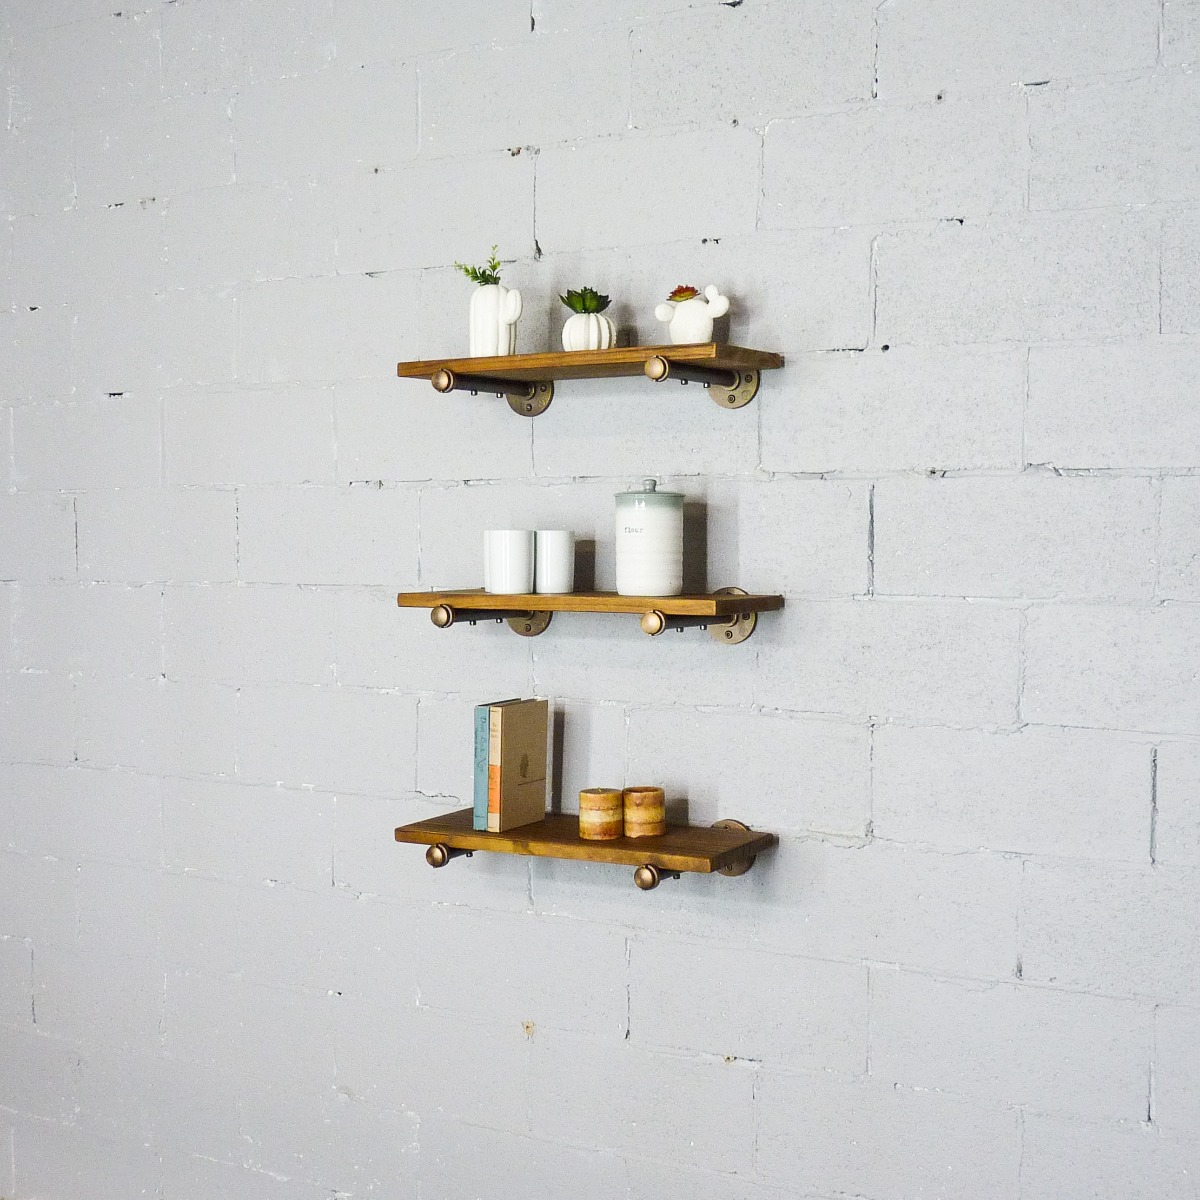 Shlf181x3-bz-bz-br 18 In. Colorado Springs Industrial Farmhouse Wall Shelf Bundle, Rustic Bronze Combo With Light Brown Stained Wood - 3 Piece